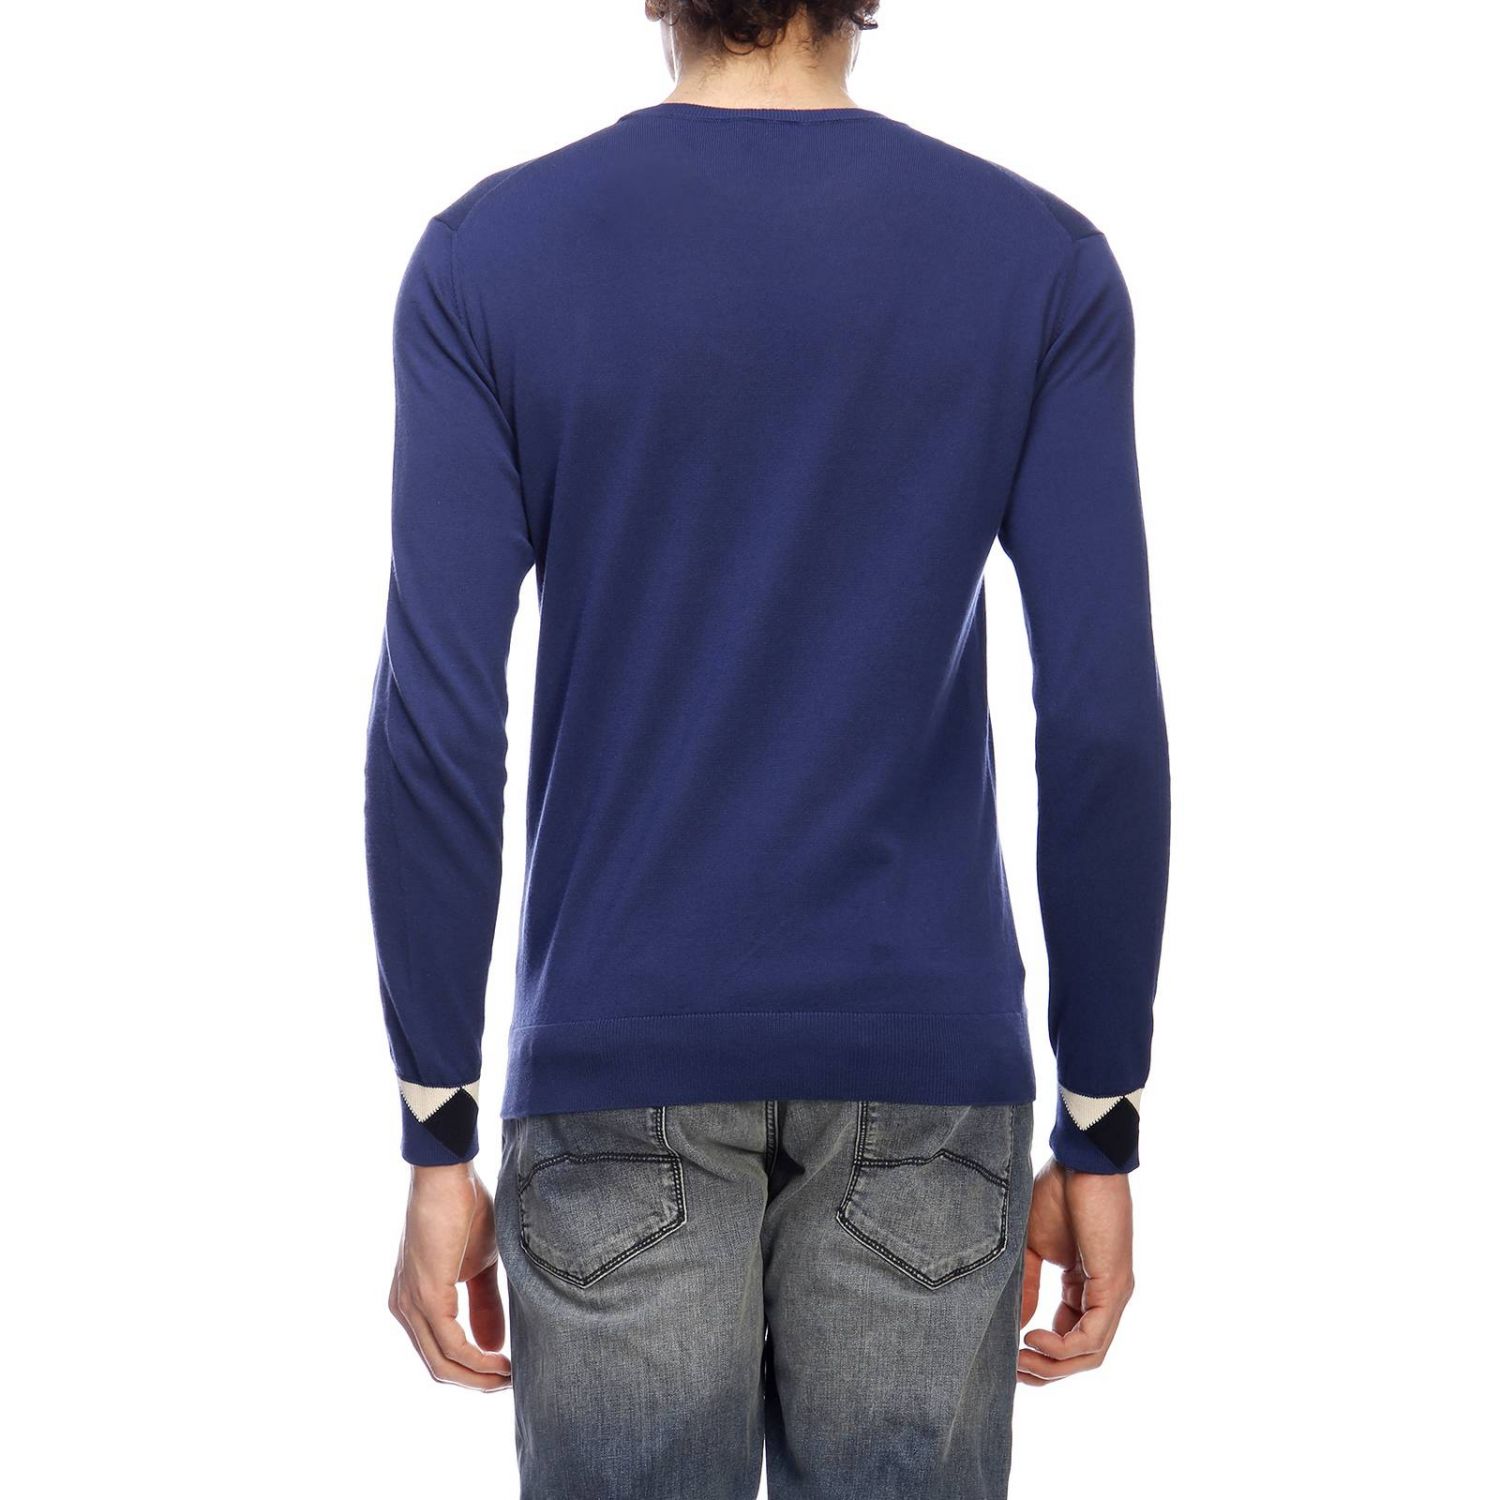 Etro Outlet: sweater for man - Ink | Etro sweater 1M500 9403 online on ...